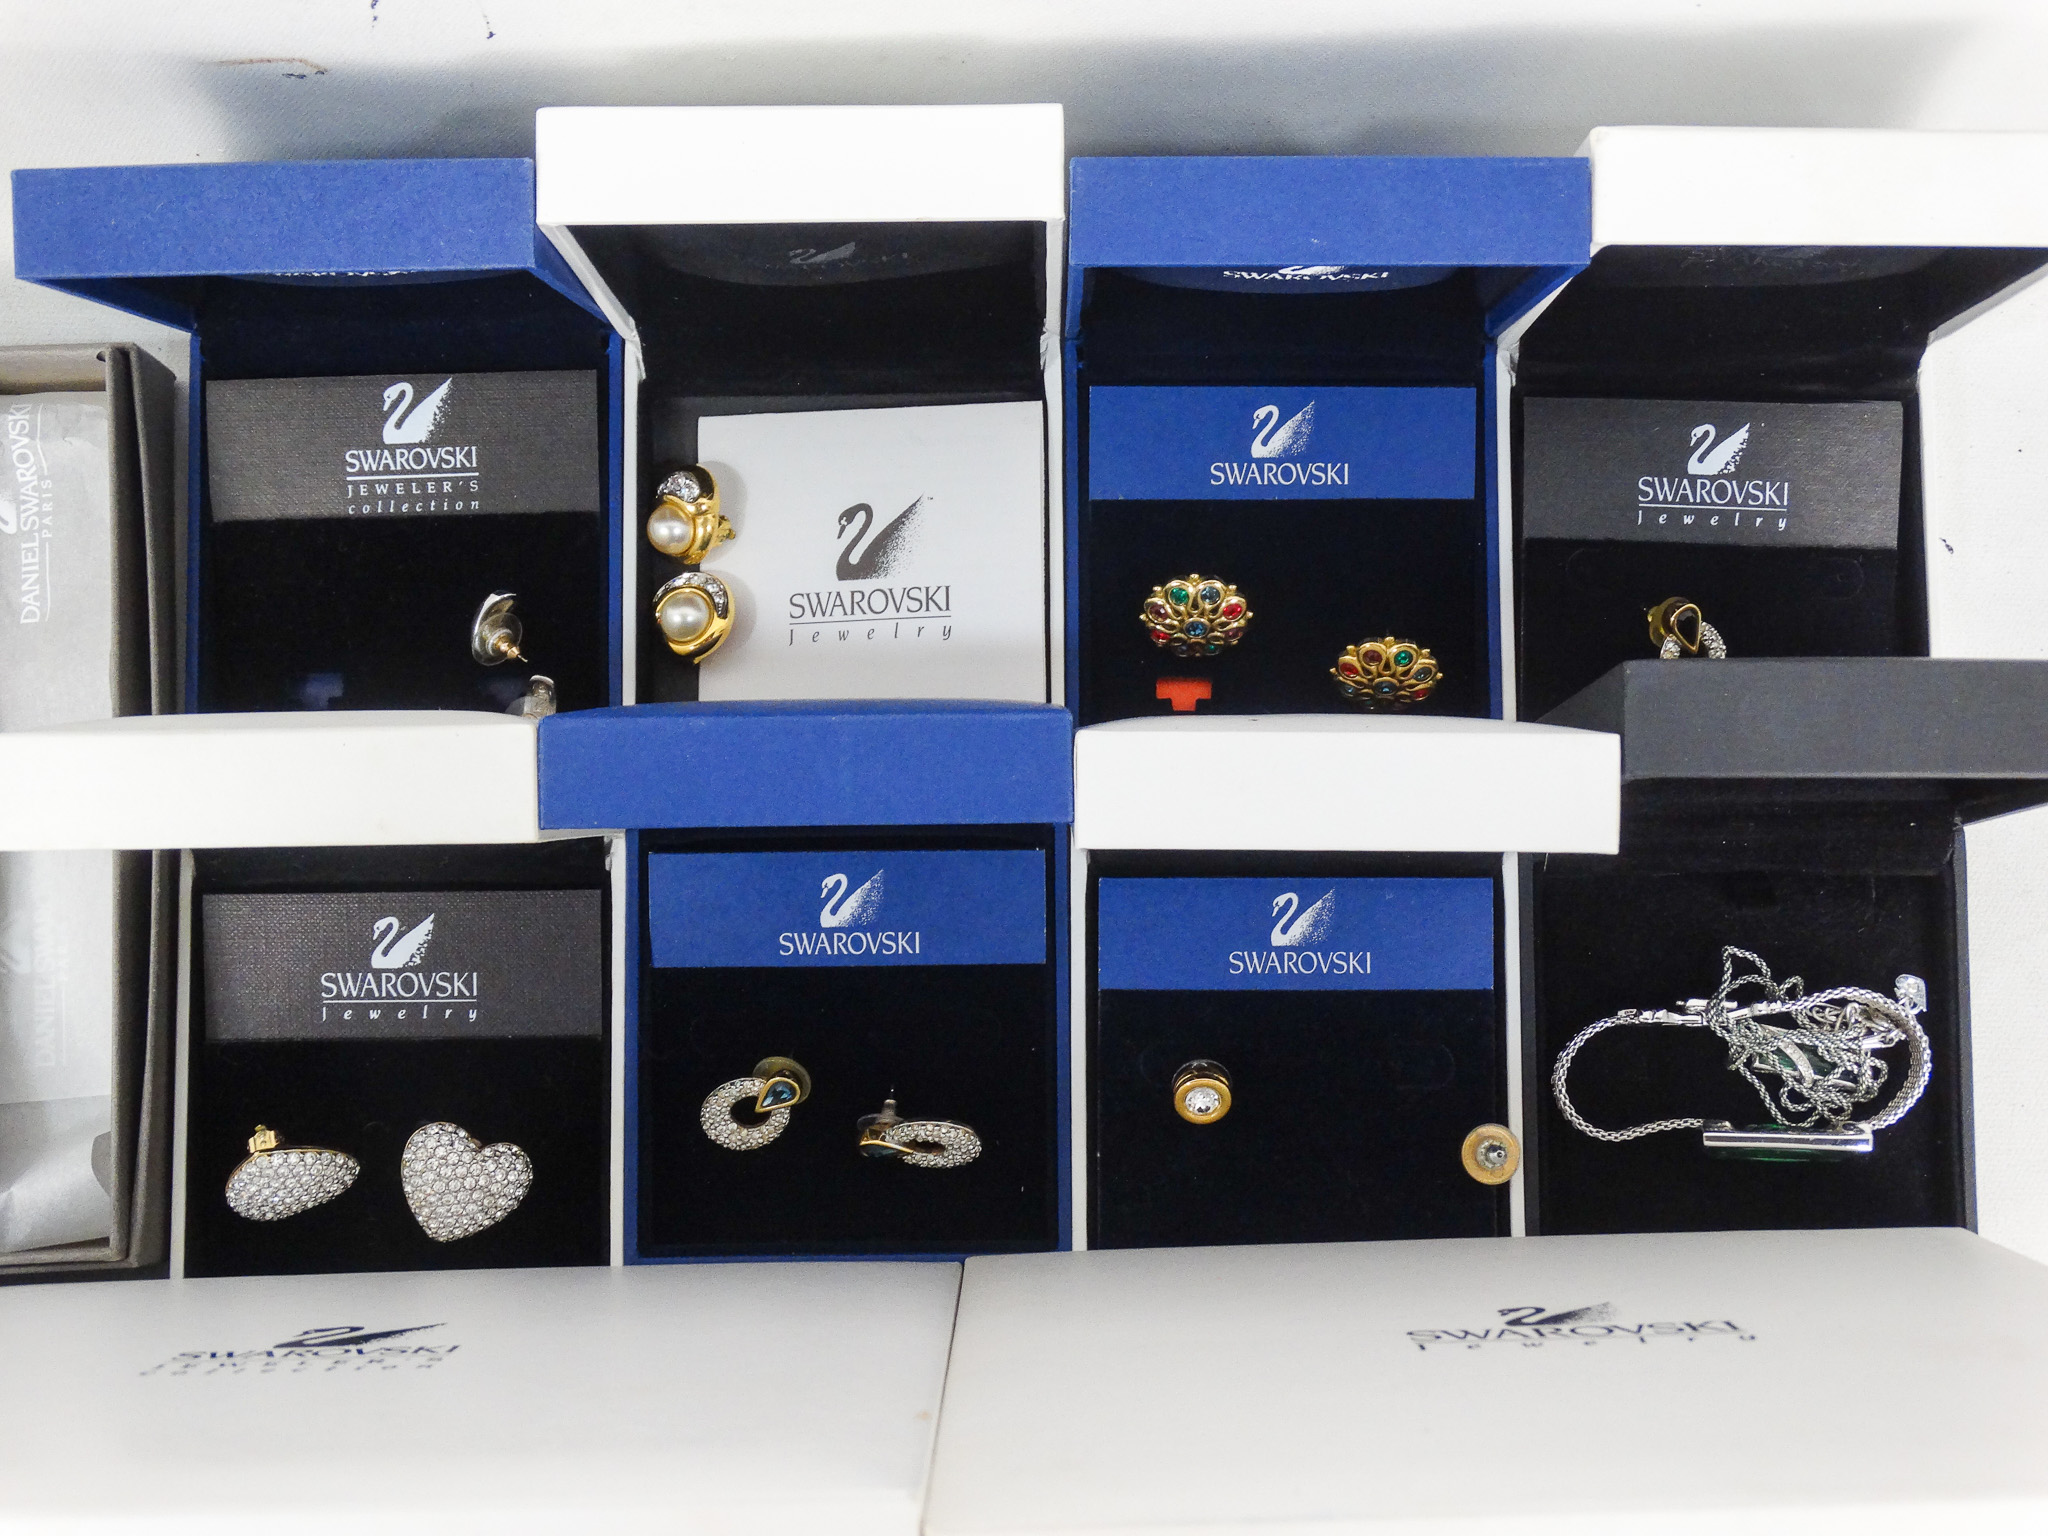 A quantity of Swarovski costume jewellery - many items with original retail boxes - Image 4 of 9